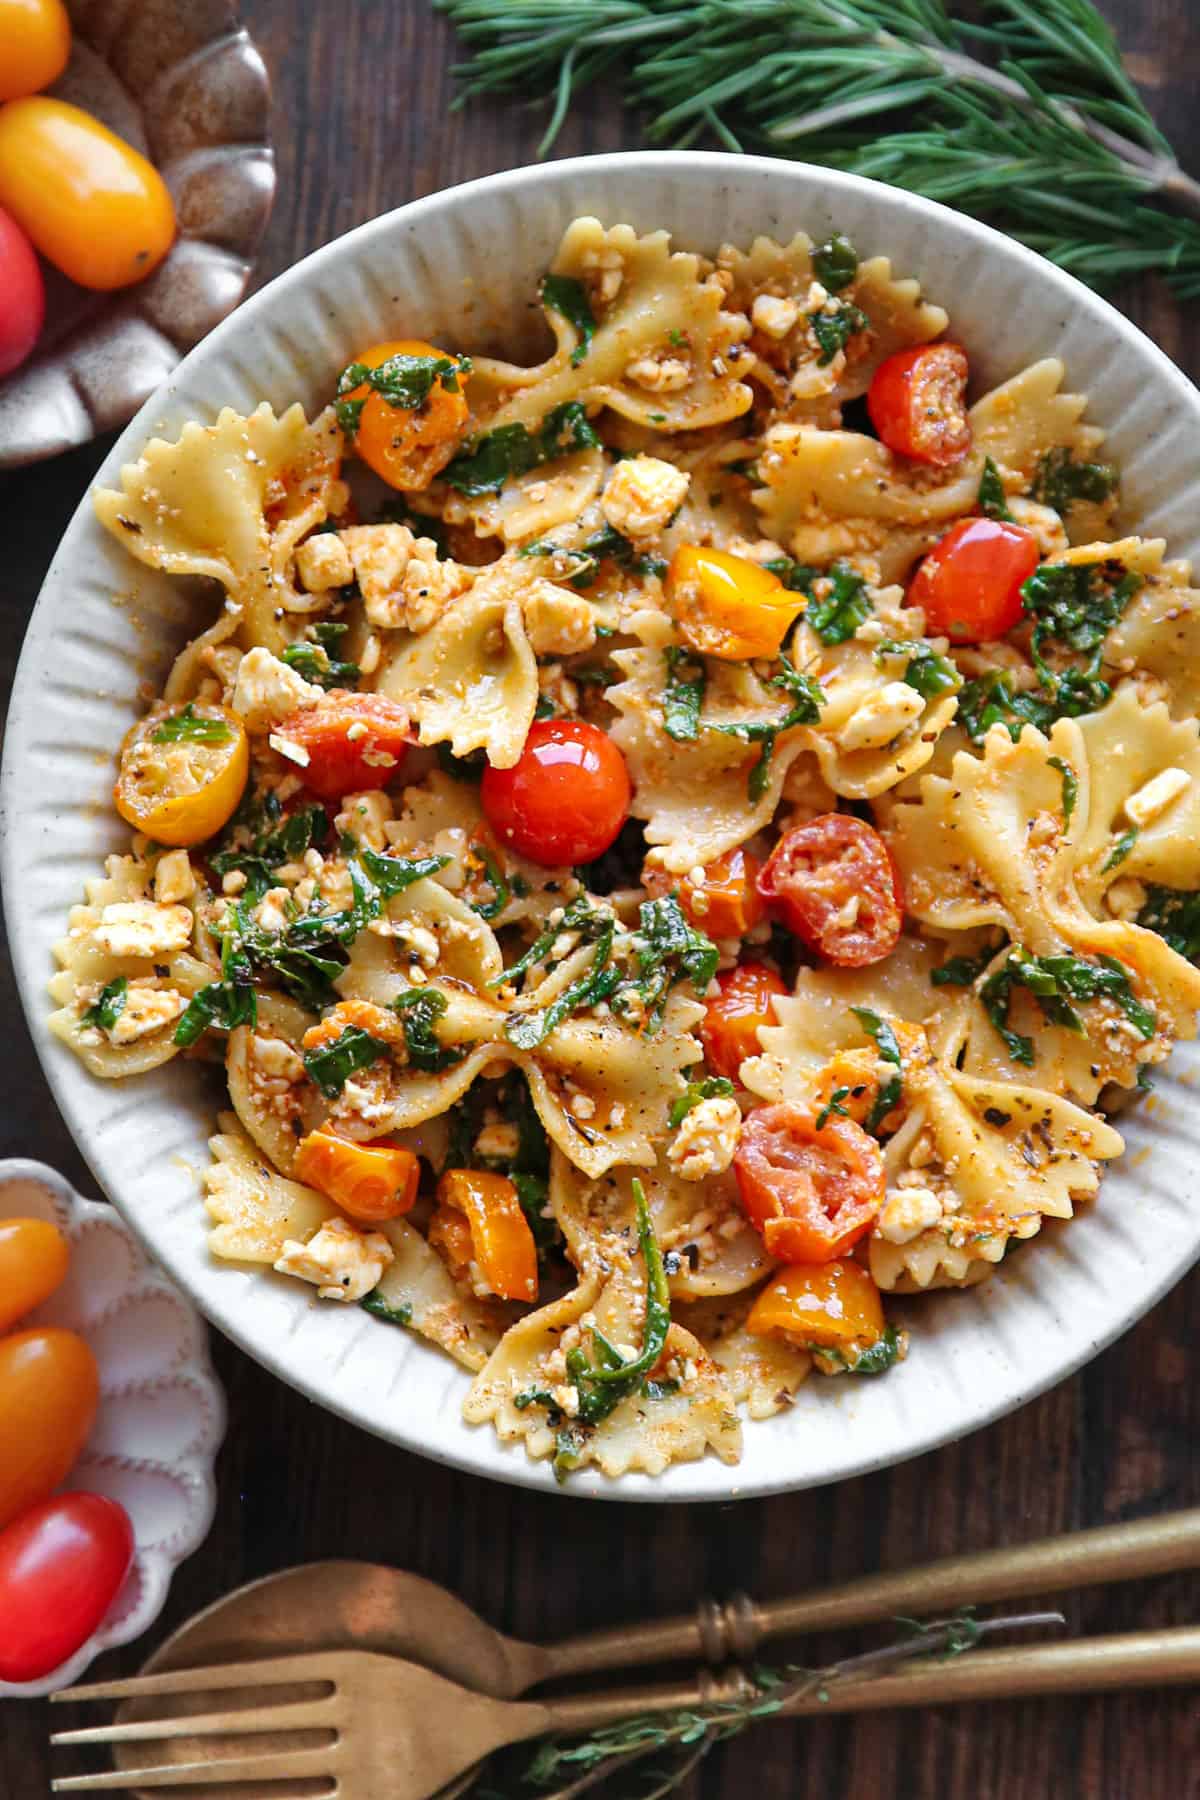 Feta Pasta (with no chicken) with bow-tie pasta, tomatoes, and spinach - in a white bowl.